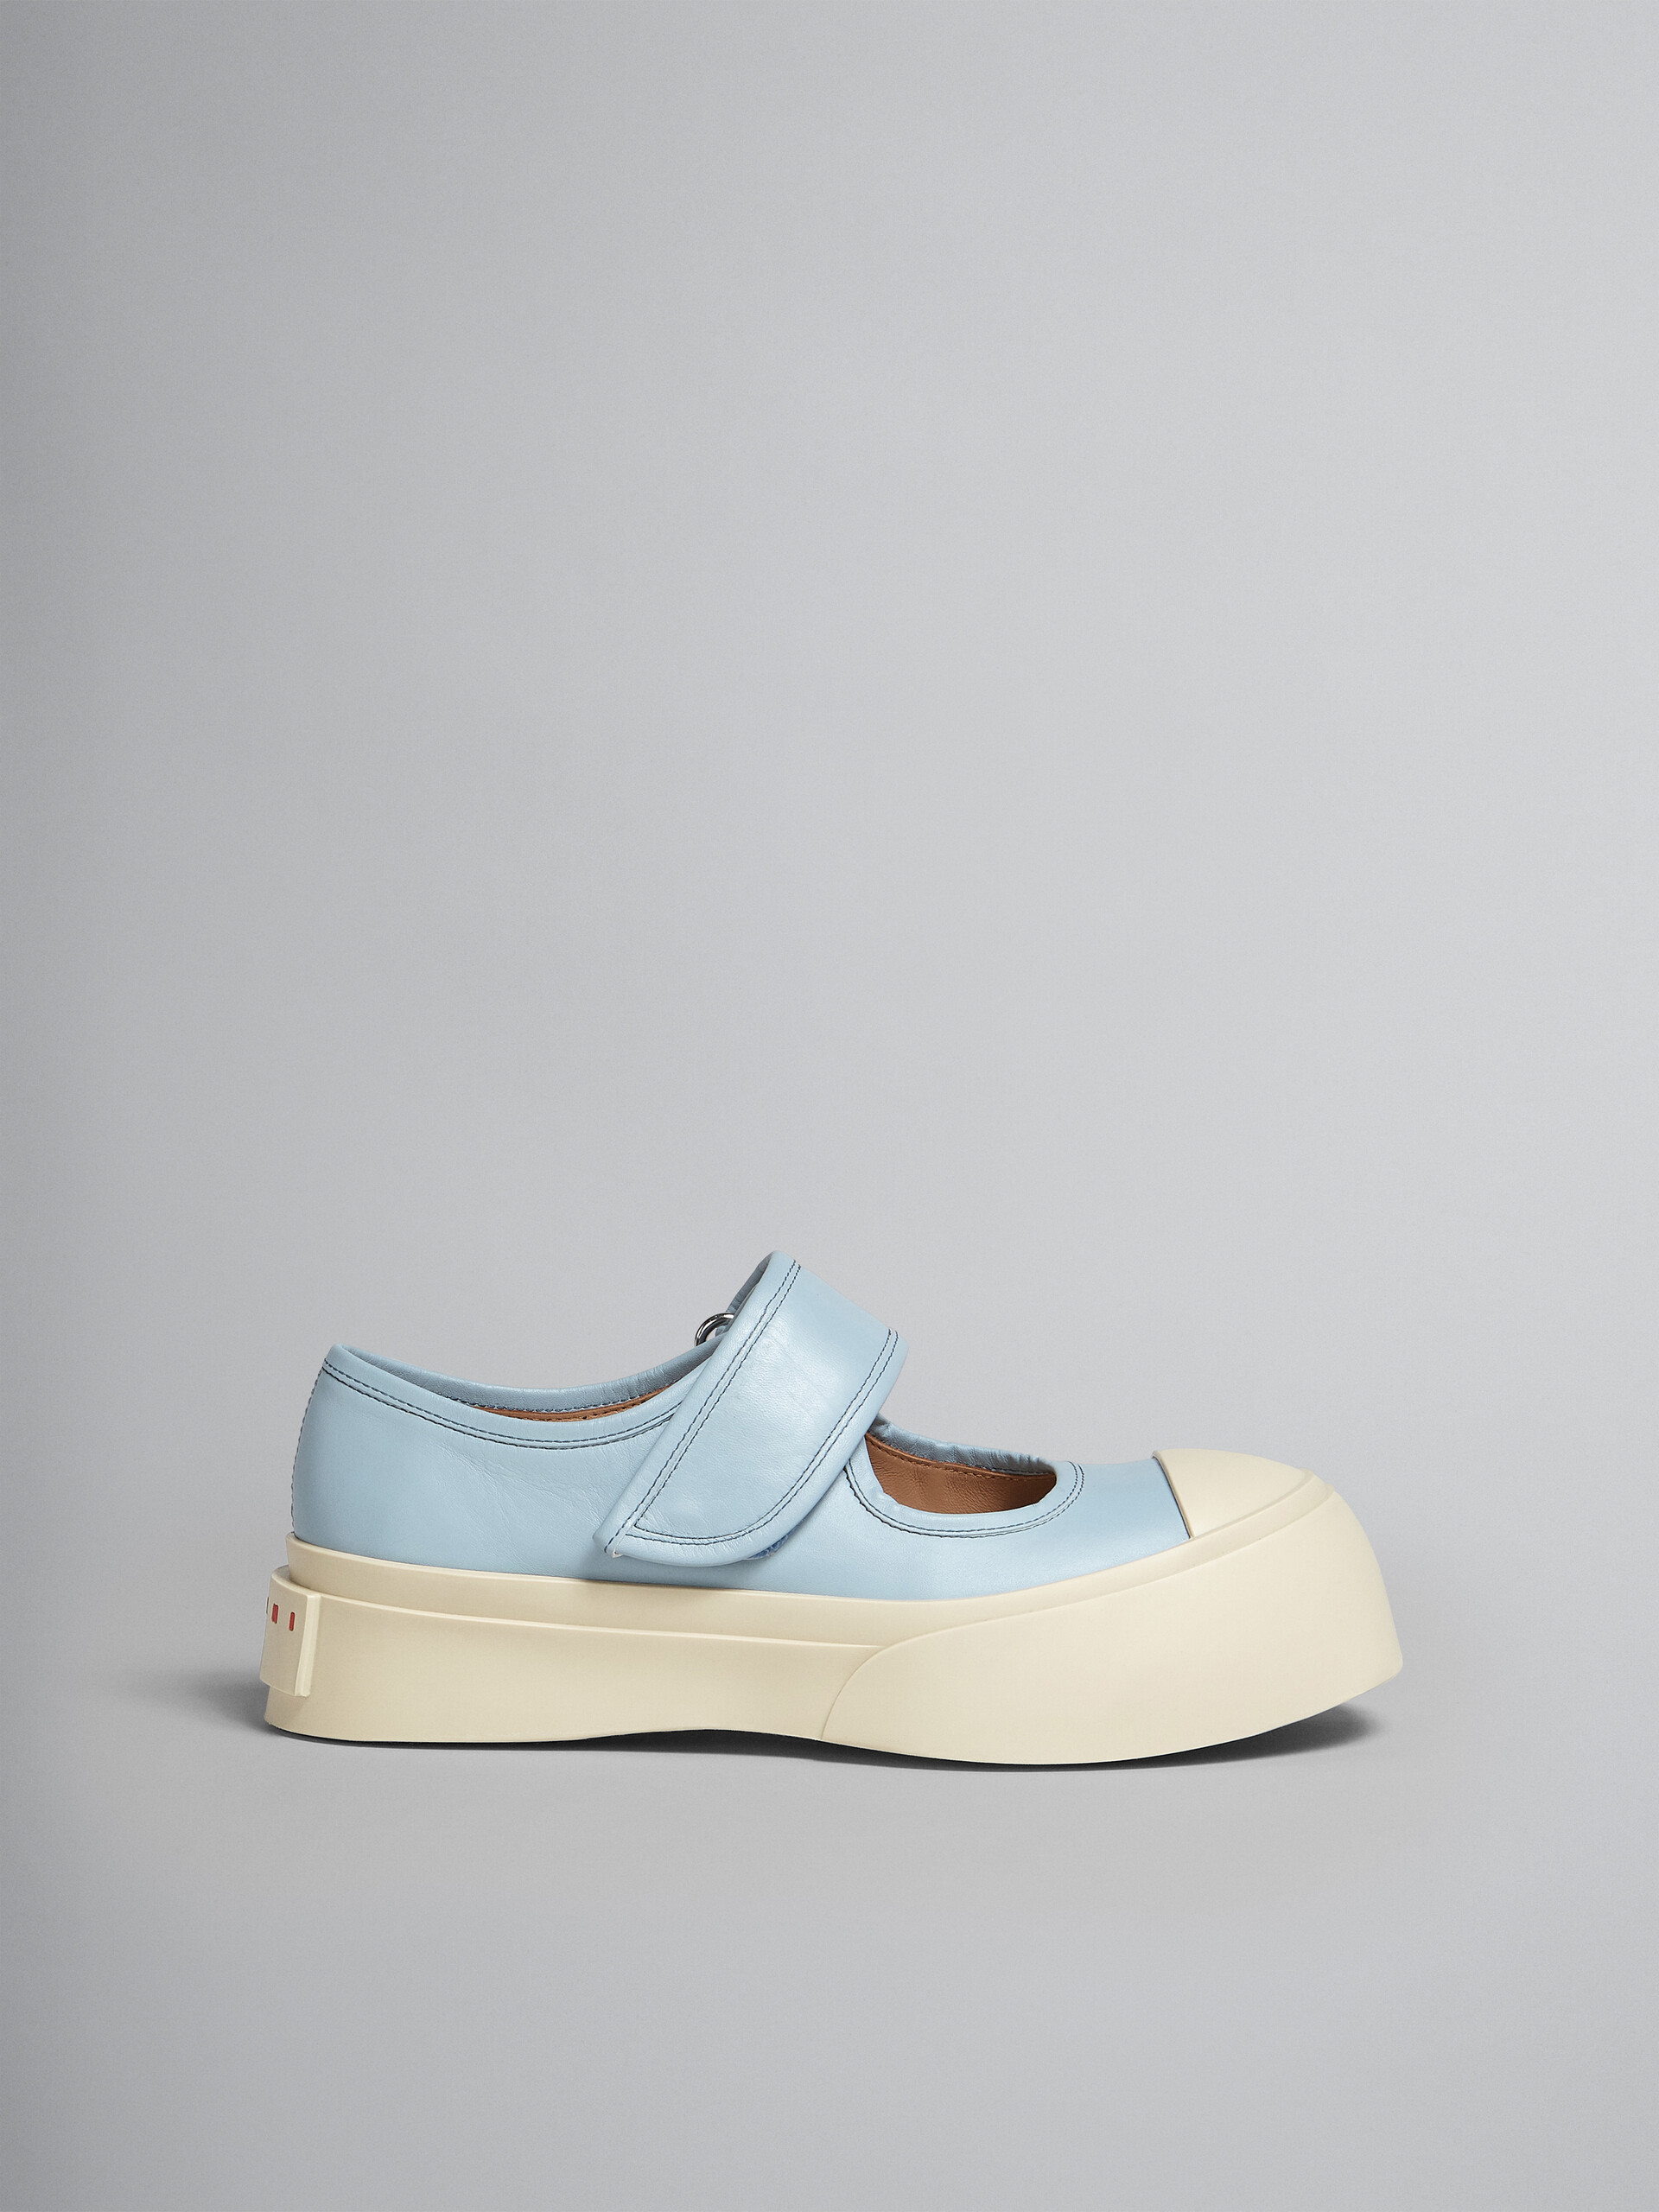 Light blue nappa leather Mary Jane sneaker - Sneakers - Image 1